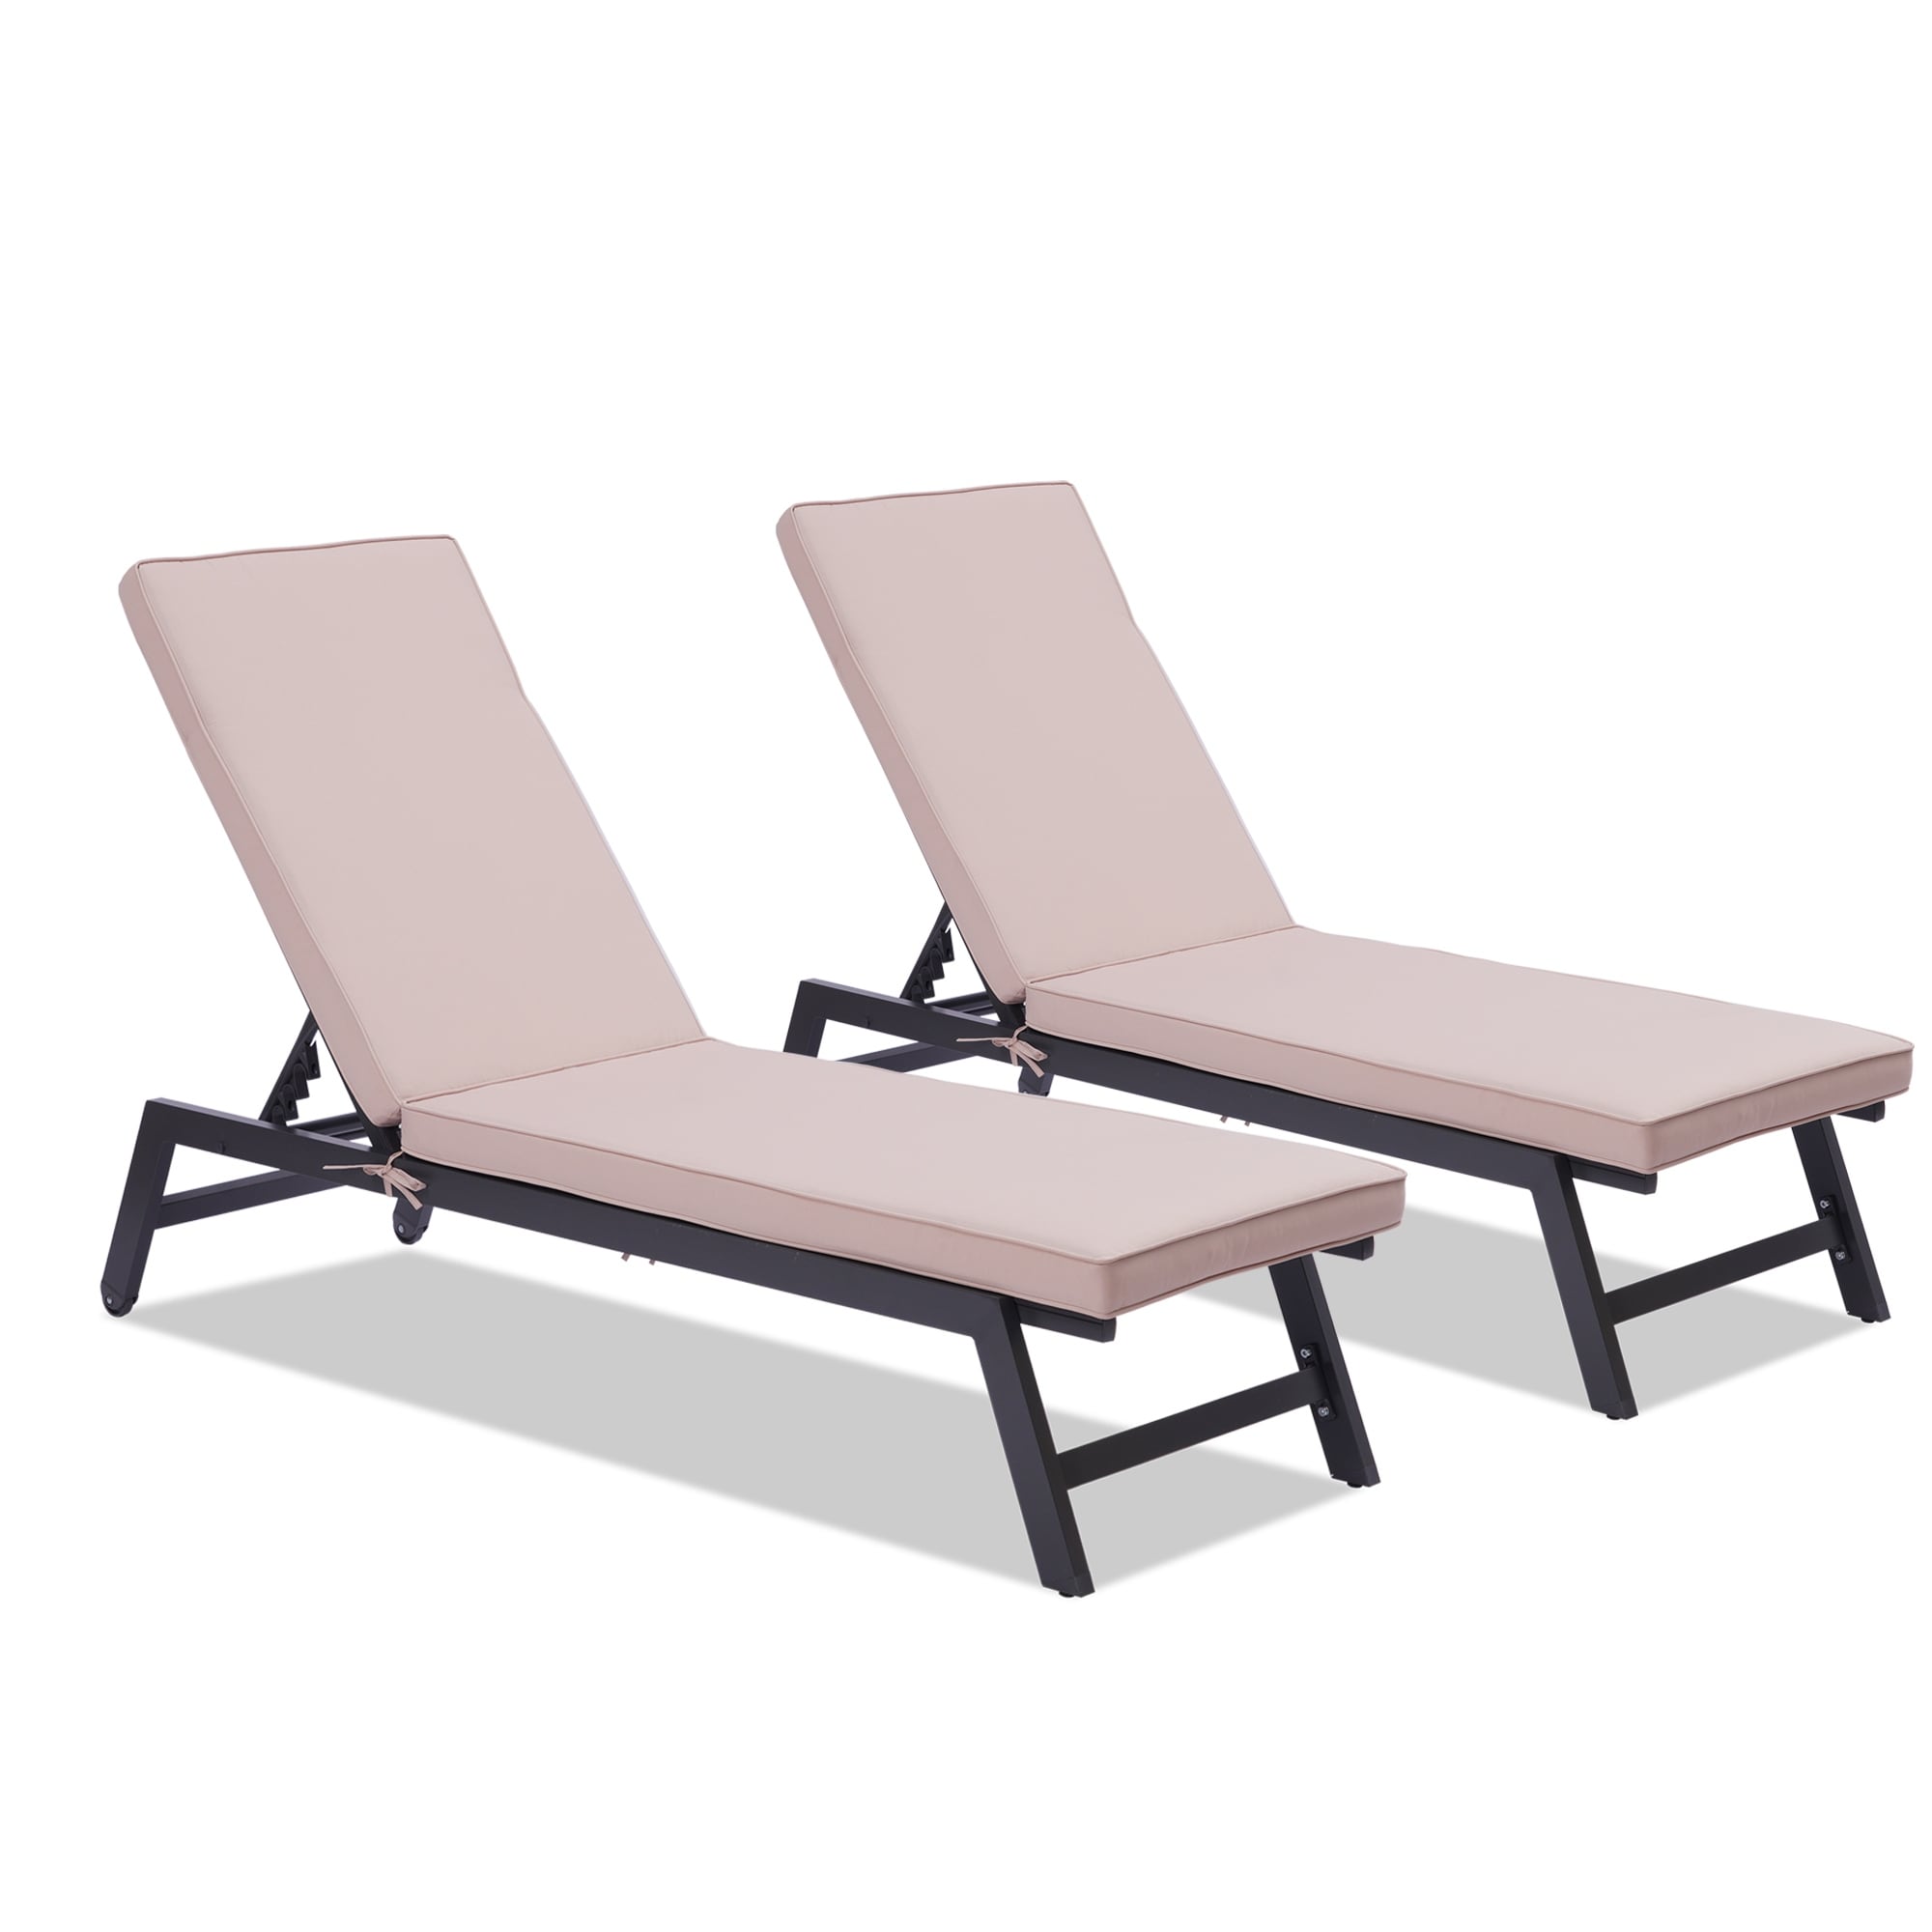 Outdoor Chaise Lounge Chair Set With Cushions Five-position Adjustable Aluminum Recliner  All Weather For Patio Beach Yard